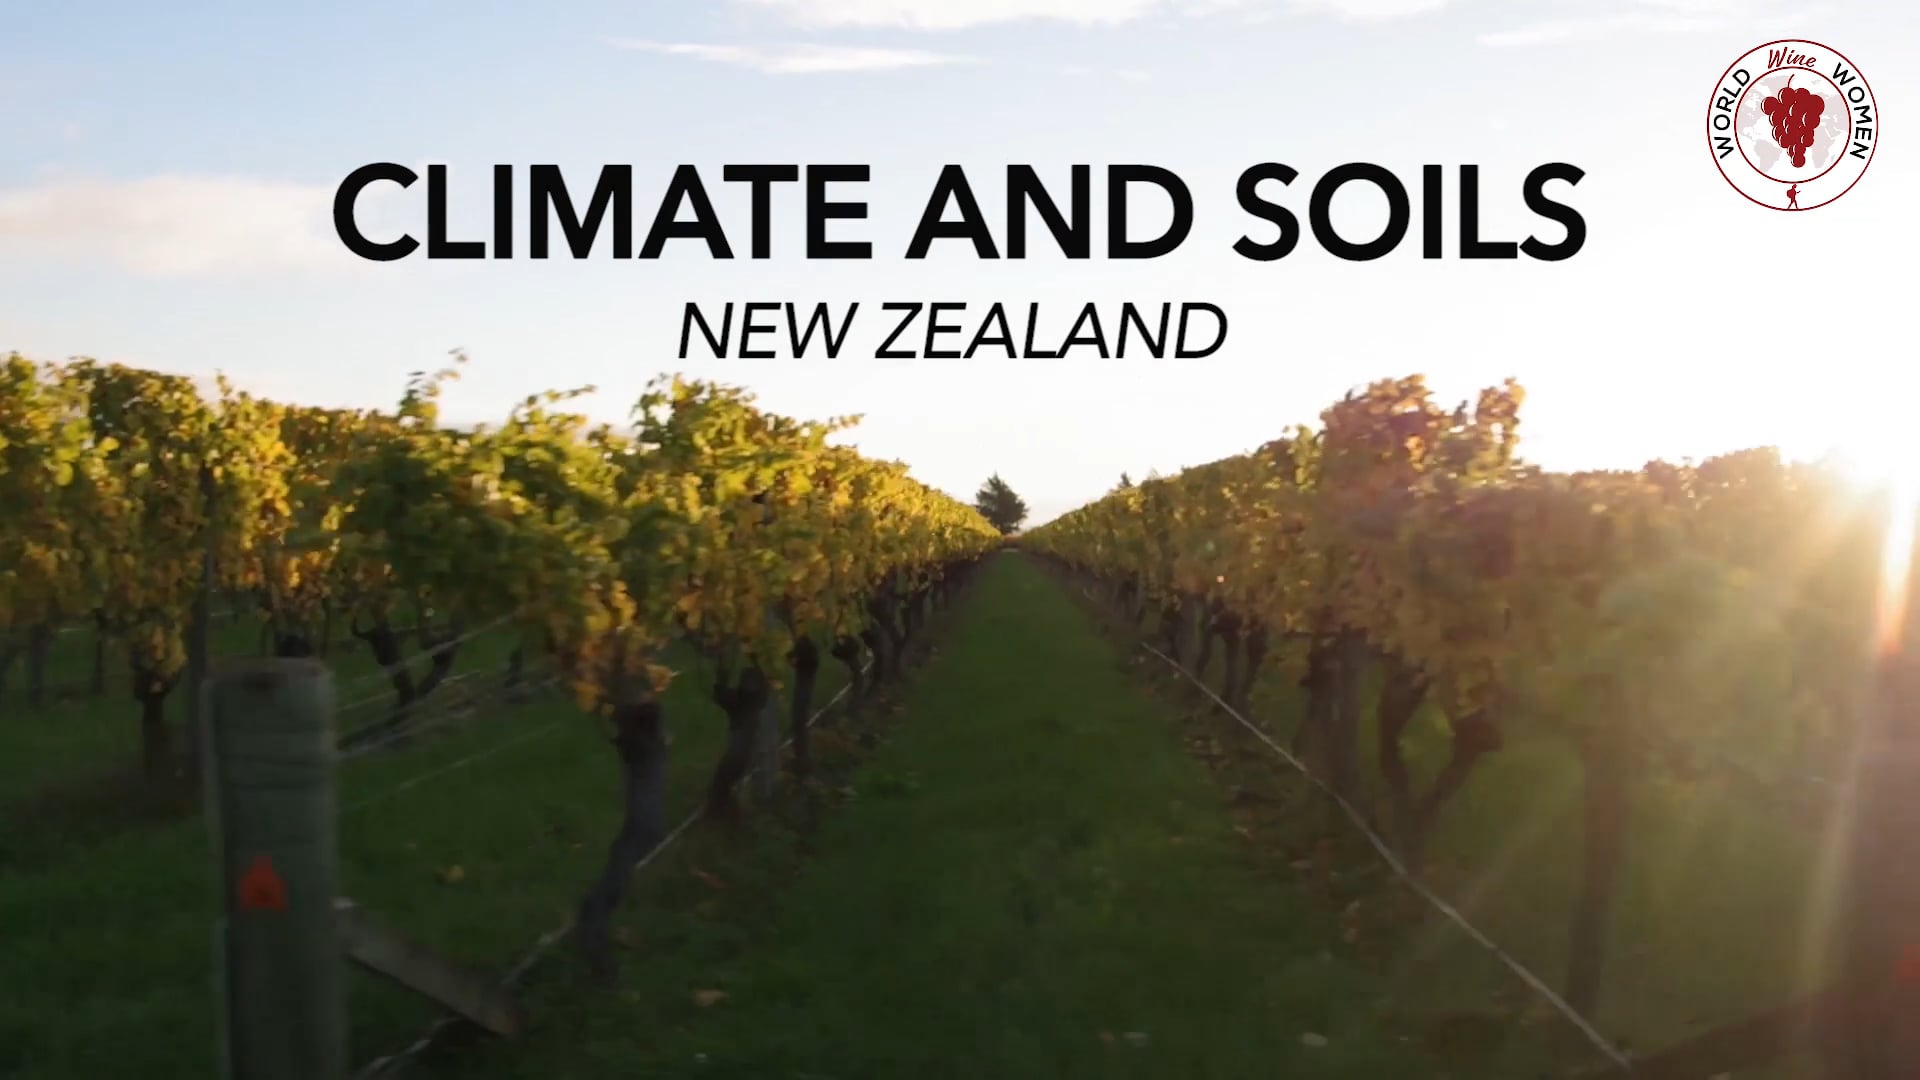 Climate and soil - New Zealand